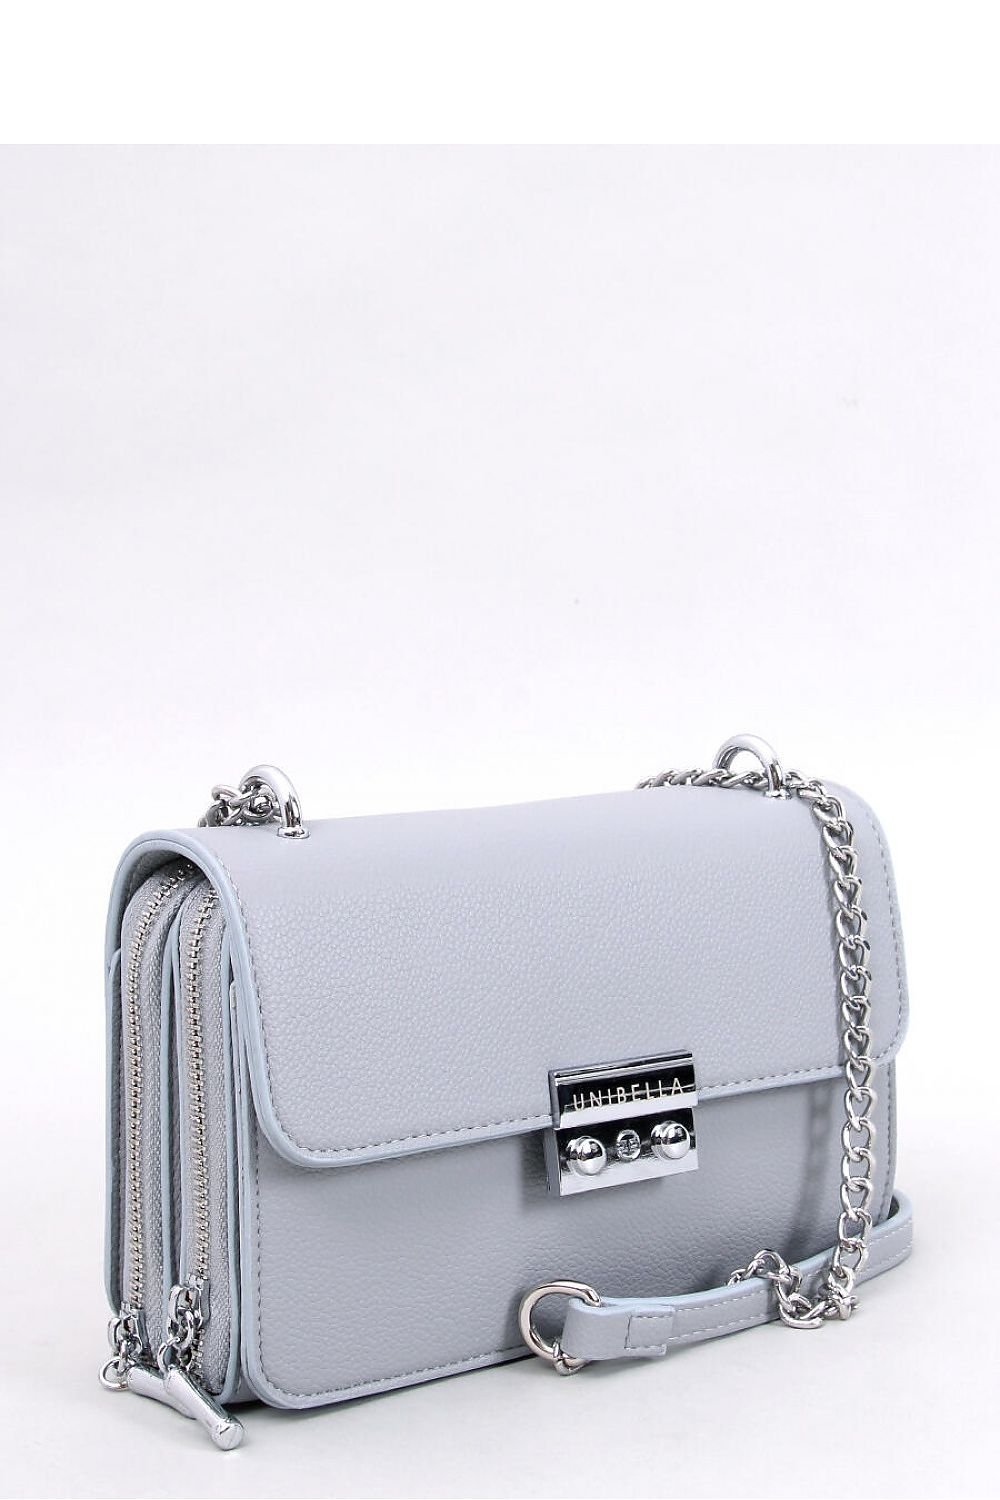 Gray messenger bag with a stylish snap closure